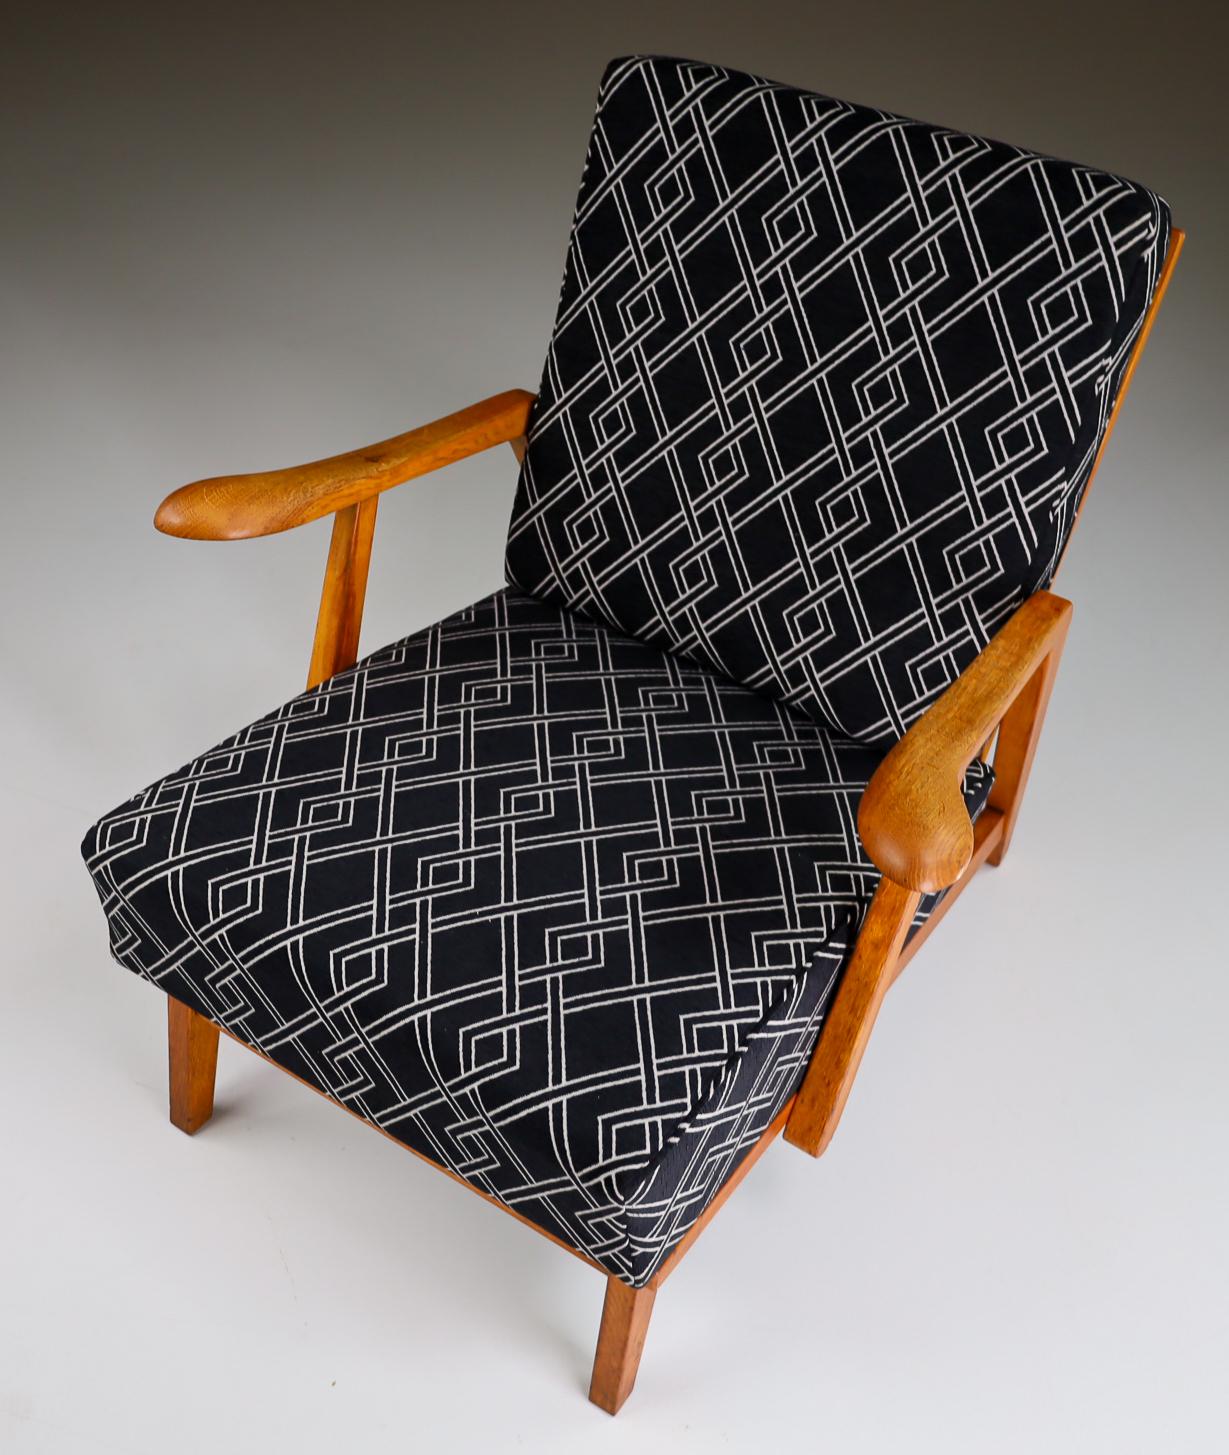 Set/2 Sculptural Armchairs in Oak and Reupholstered Fabric, France, 1950s For Sale 4